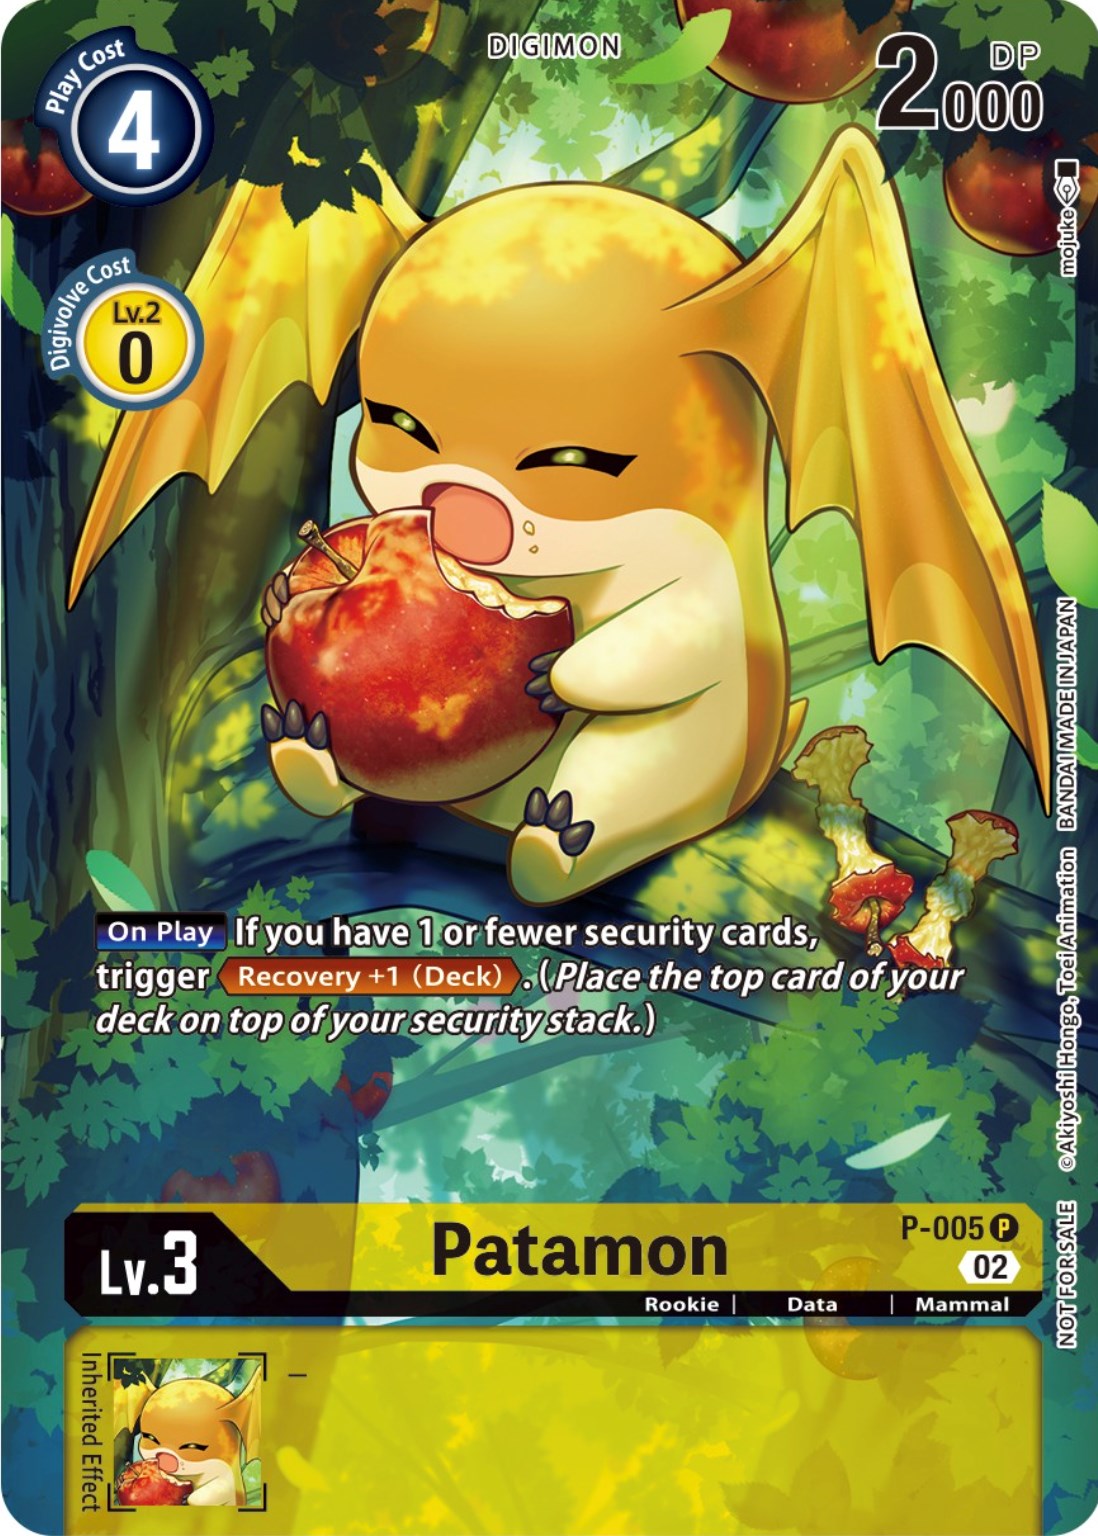 Patamon [P-005] (Digimon Illustration Competition Promotion Pack) [Promotional Cards] | Total Play